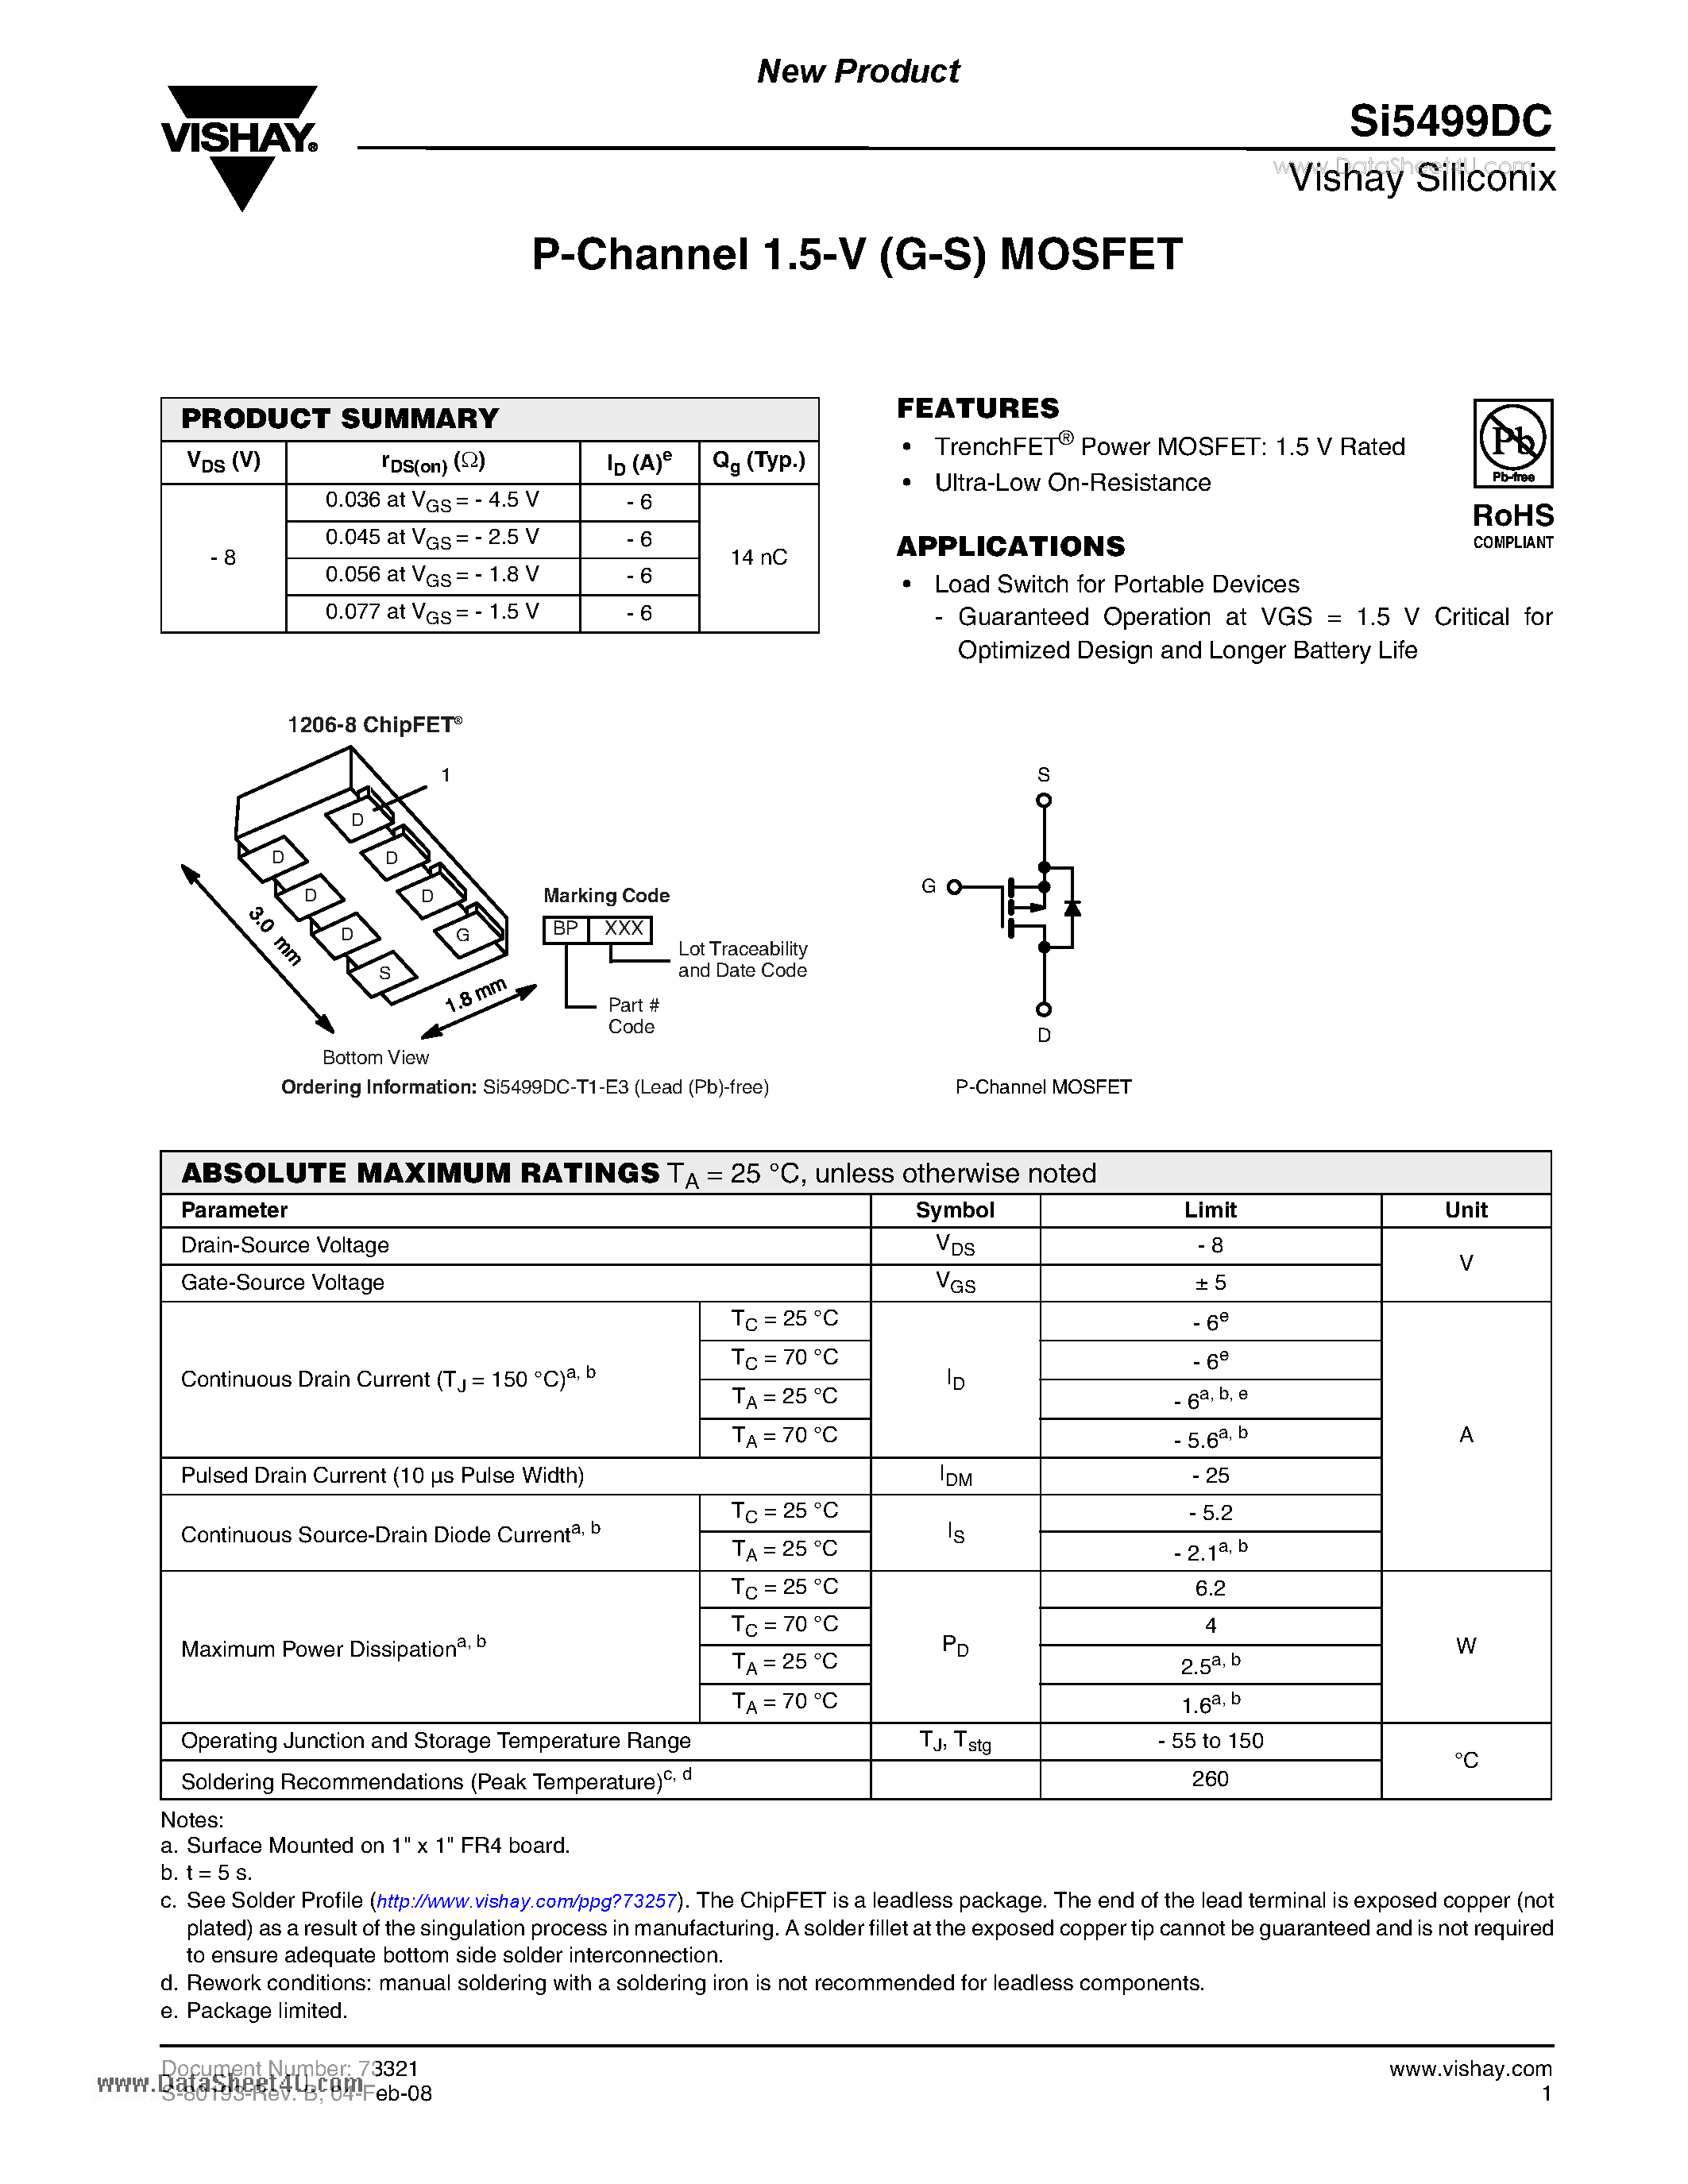 Datasheet Si5499DC - P-Channel 1.5-V (G-S) MOSFET page 1